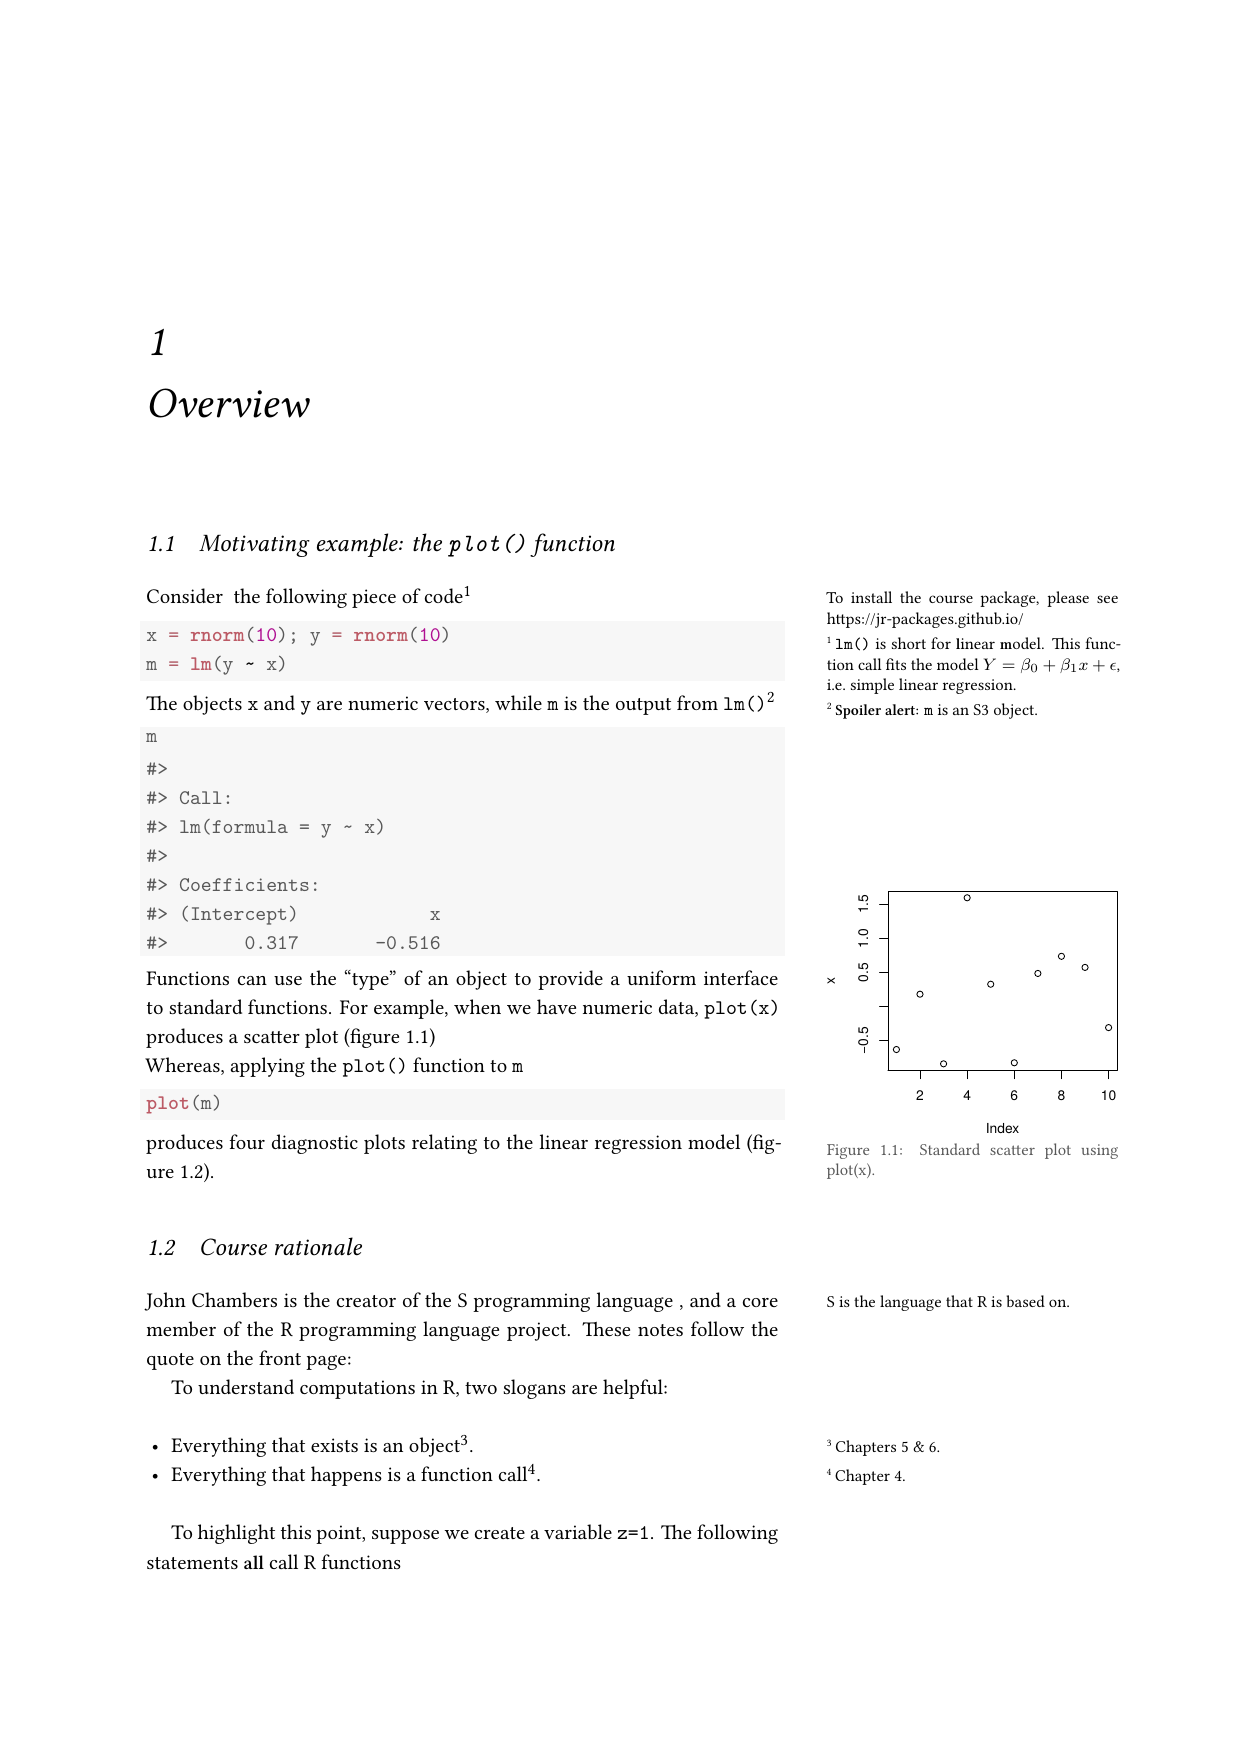 Example course material for 'Advanced R Programming